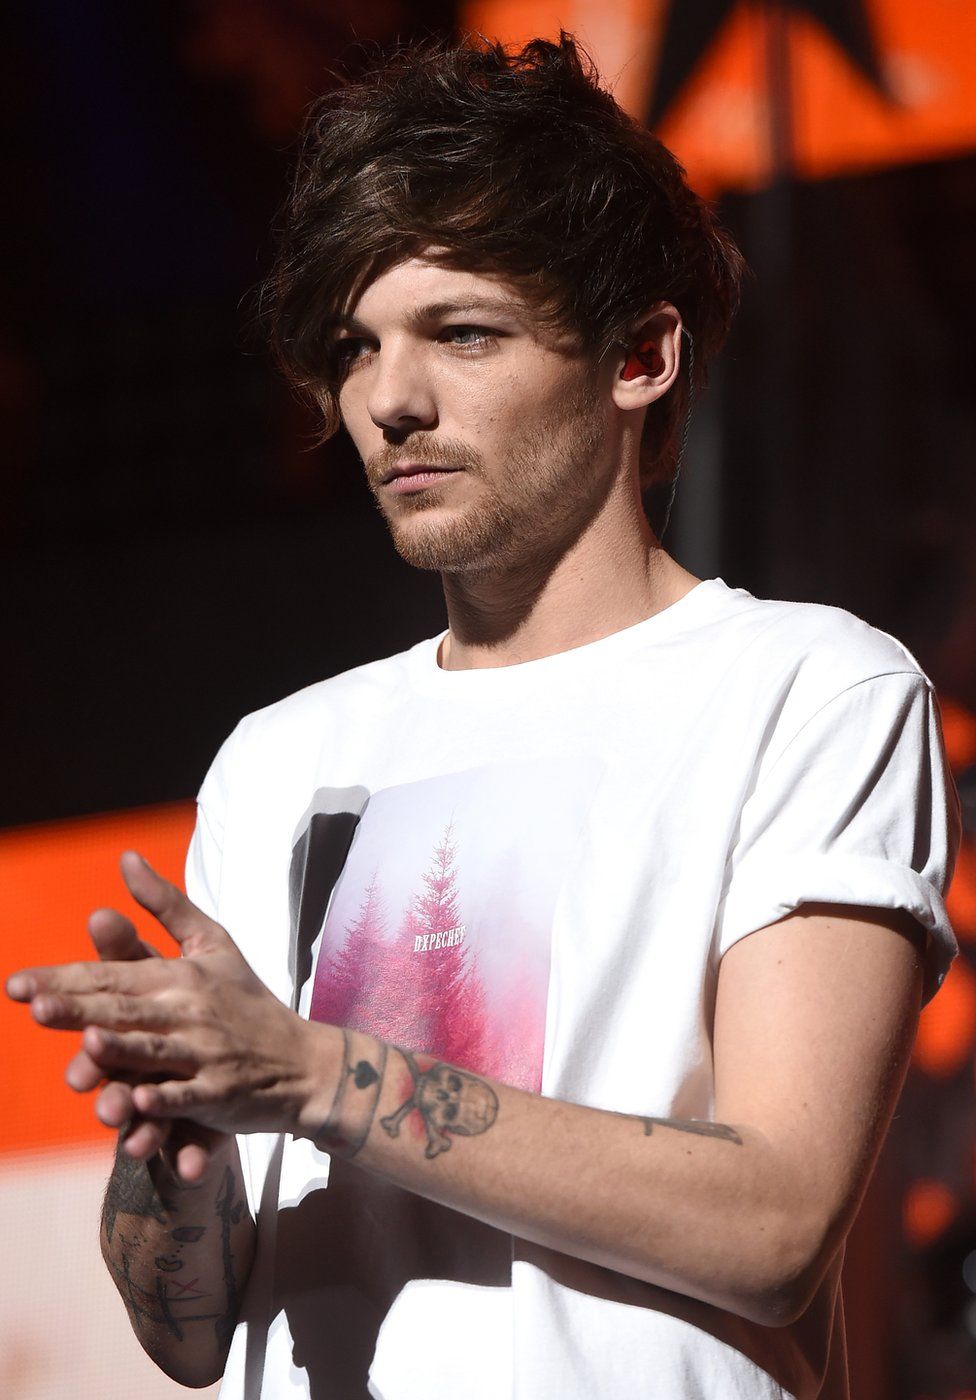 Louis on stage